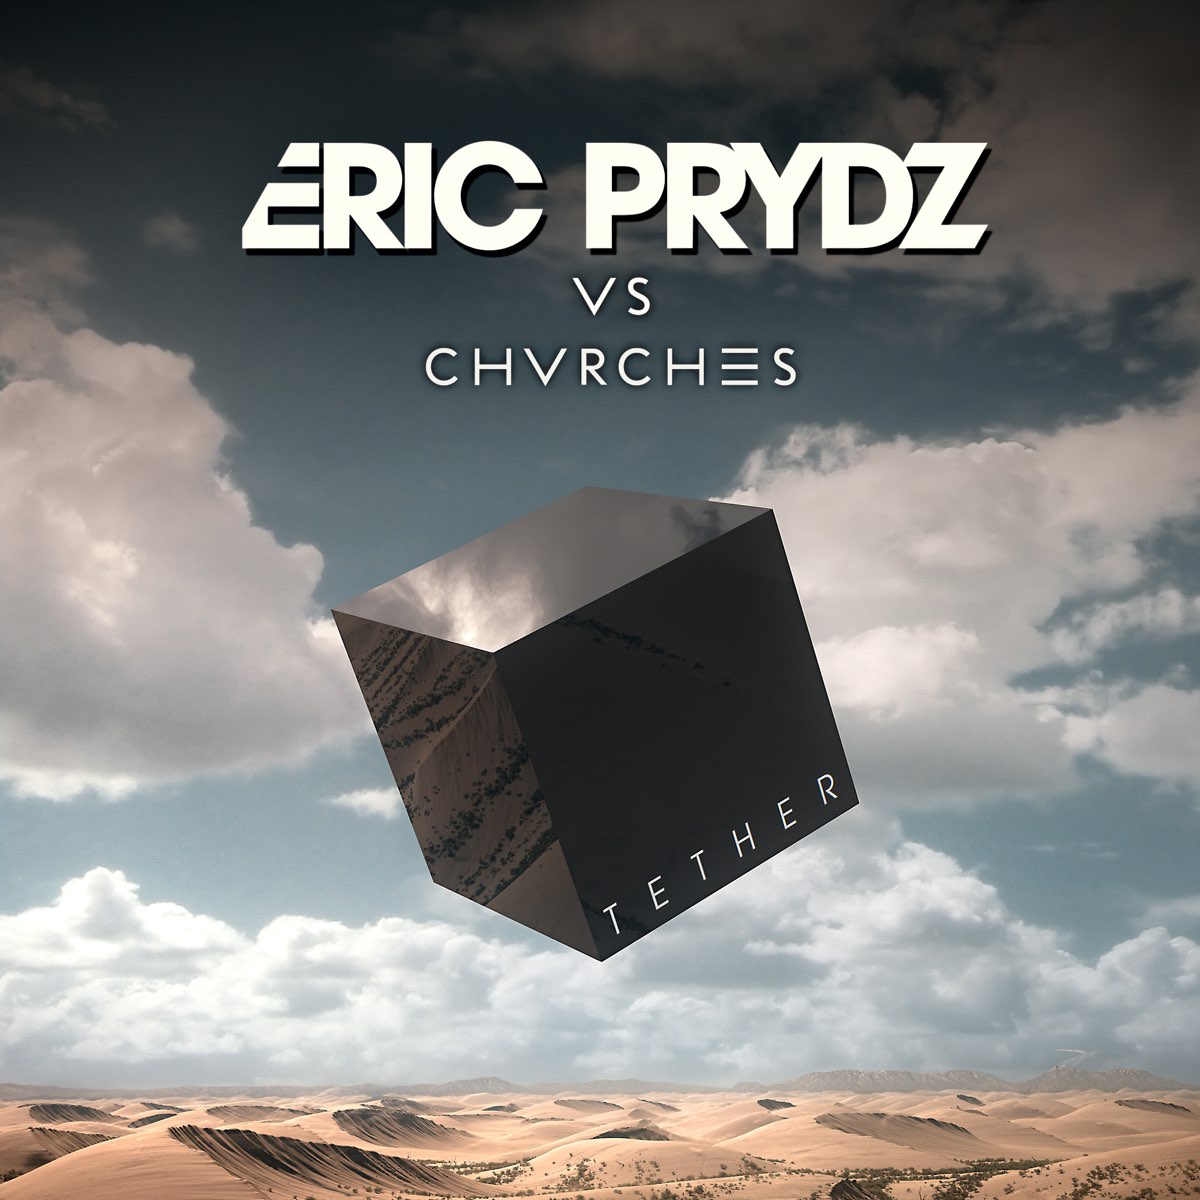 CHVRCHES featuring Eric Prydz — Tether (Eric Prydz Remix) cover artwork